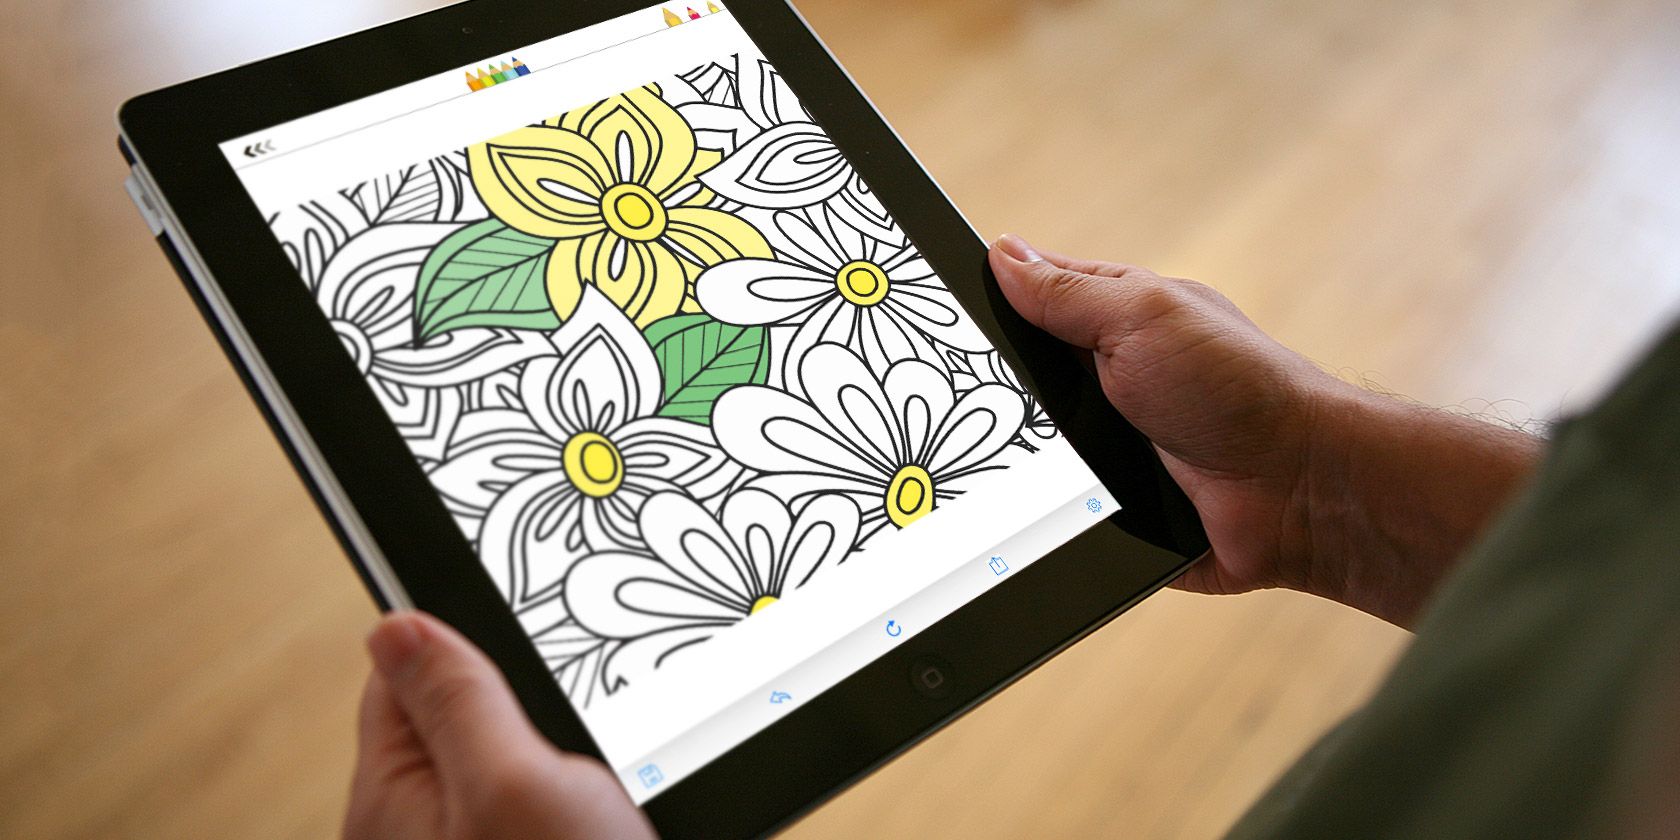 iPad Coloring Book Apps for Adults to Help You Relax Unwind